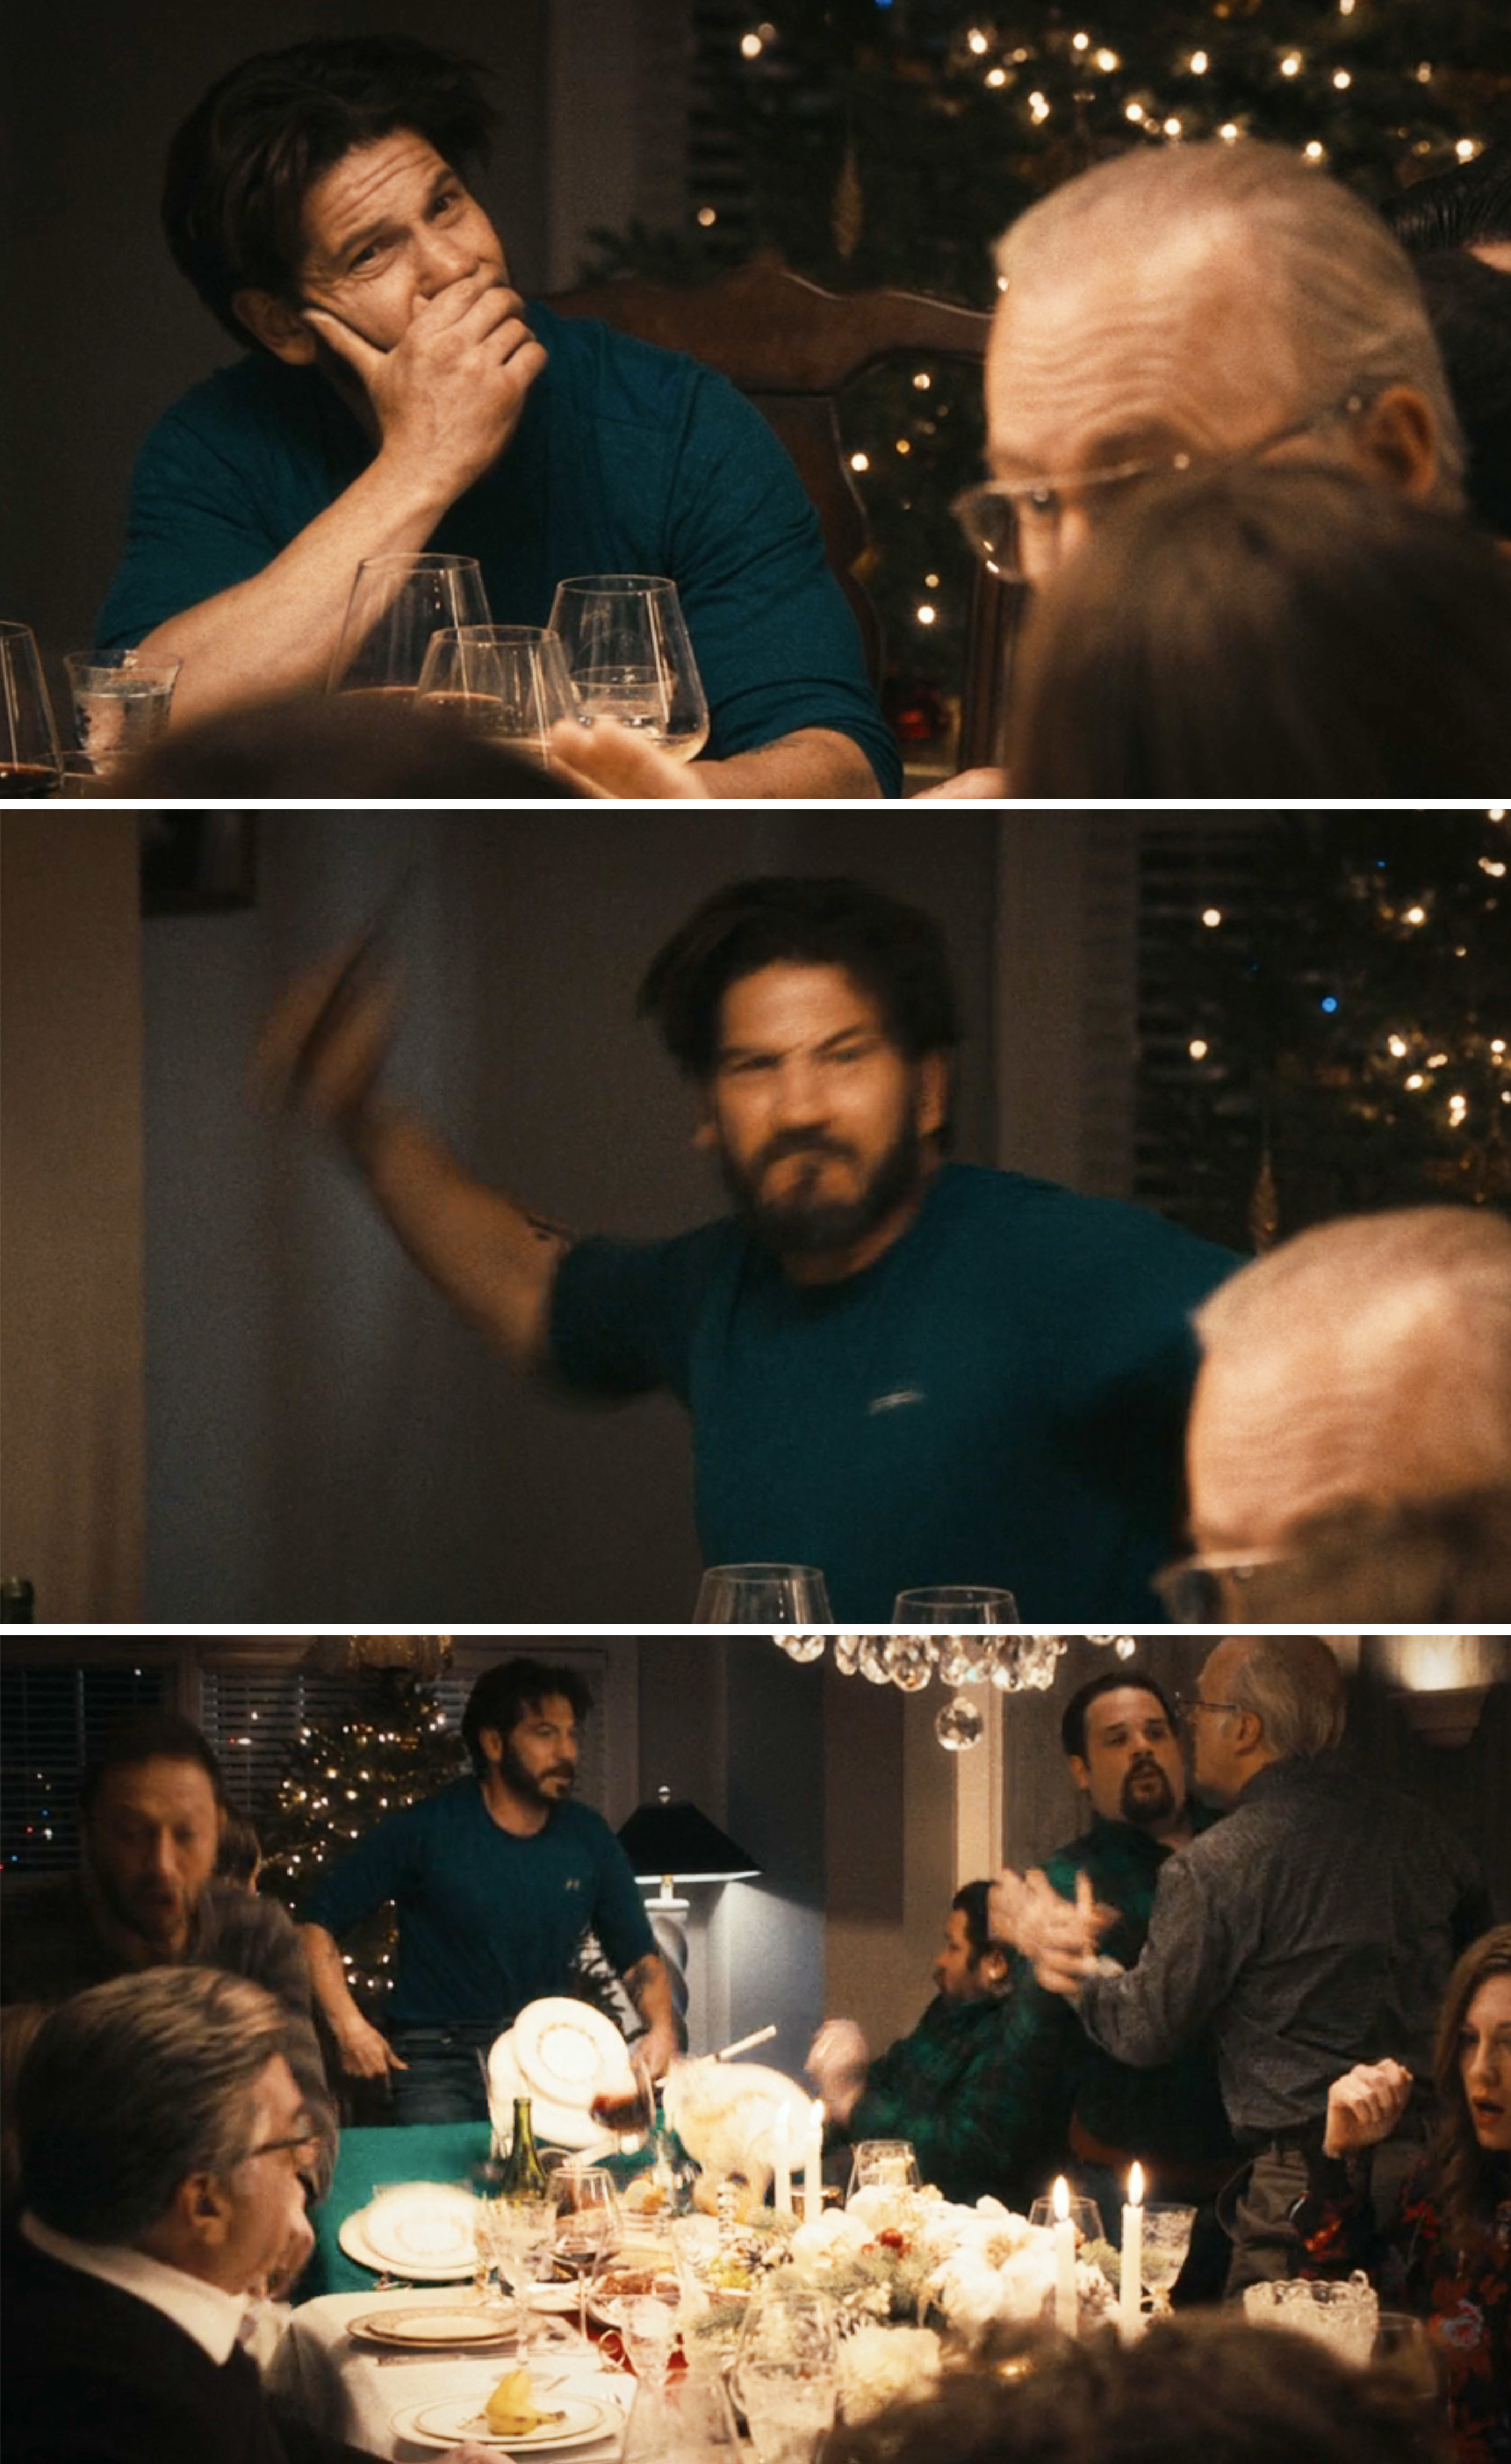 Mikey throwing a fork at Christmas dinner and then flipping a table